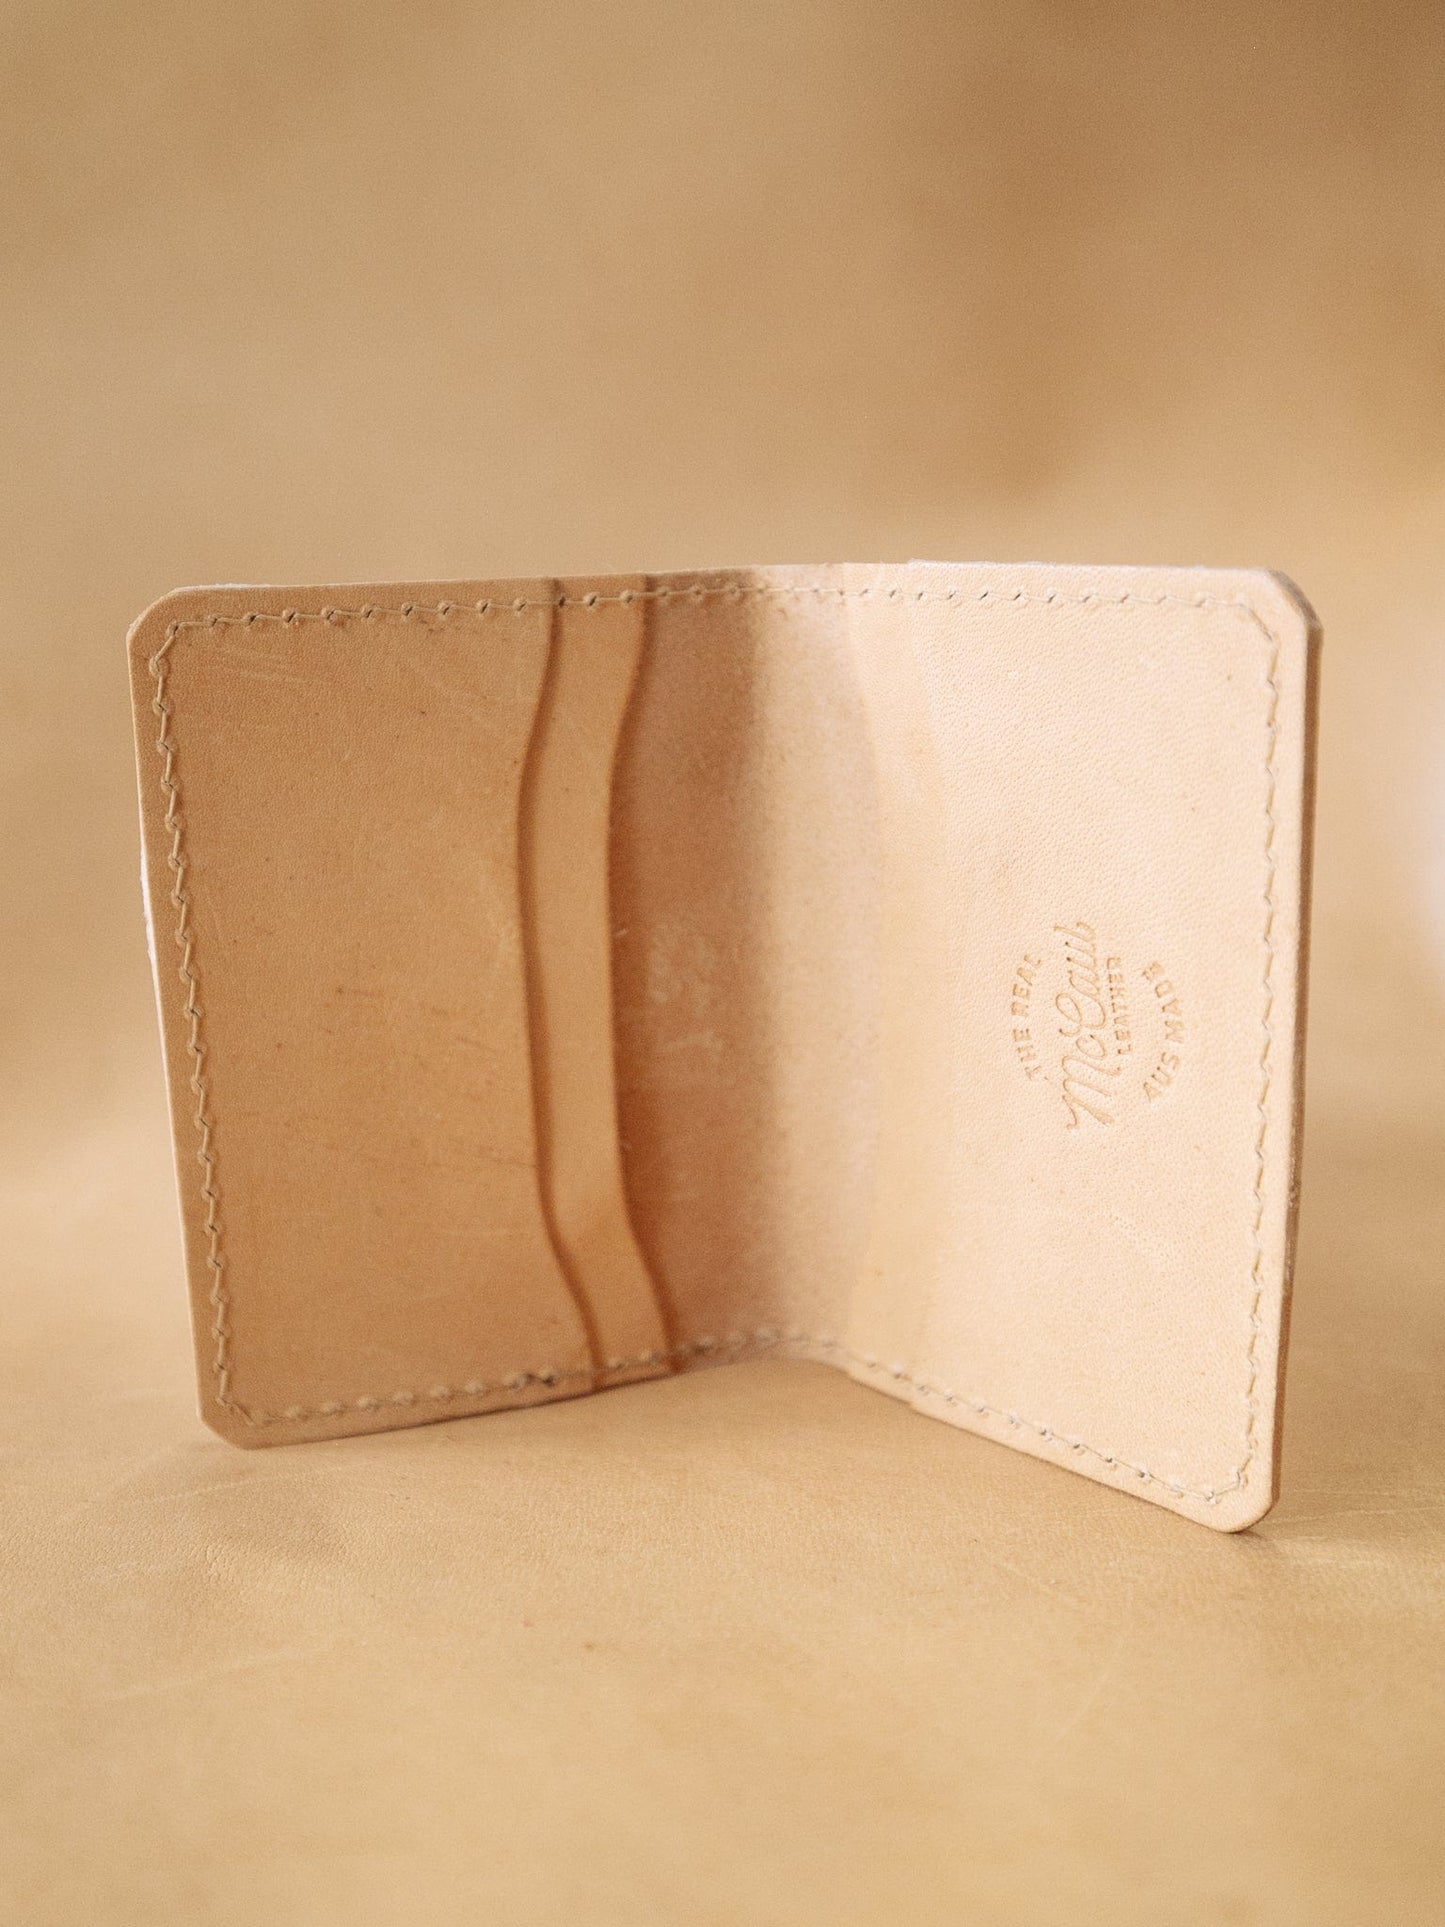 The Real McCaul Leathergoods Wallets Natural Four Pocket Card Wallet Australian Made Australian Owned Leather 2 Card Wallet Holder Made In Australia 